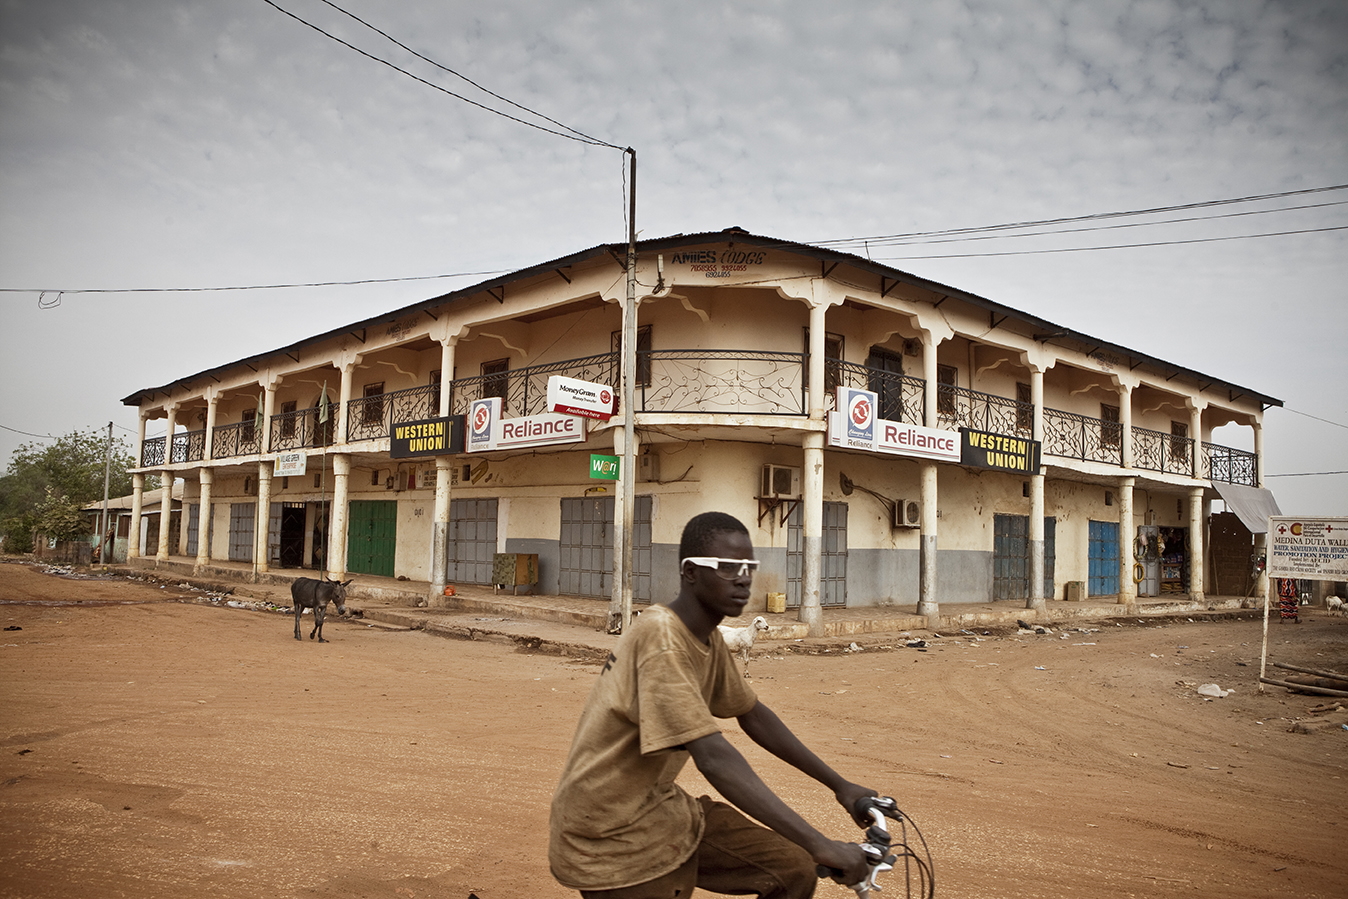 A boy in white framed sunglasses riding a bicycle past an old colonial style building in The Gambia, West Africa © Jason Florio